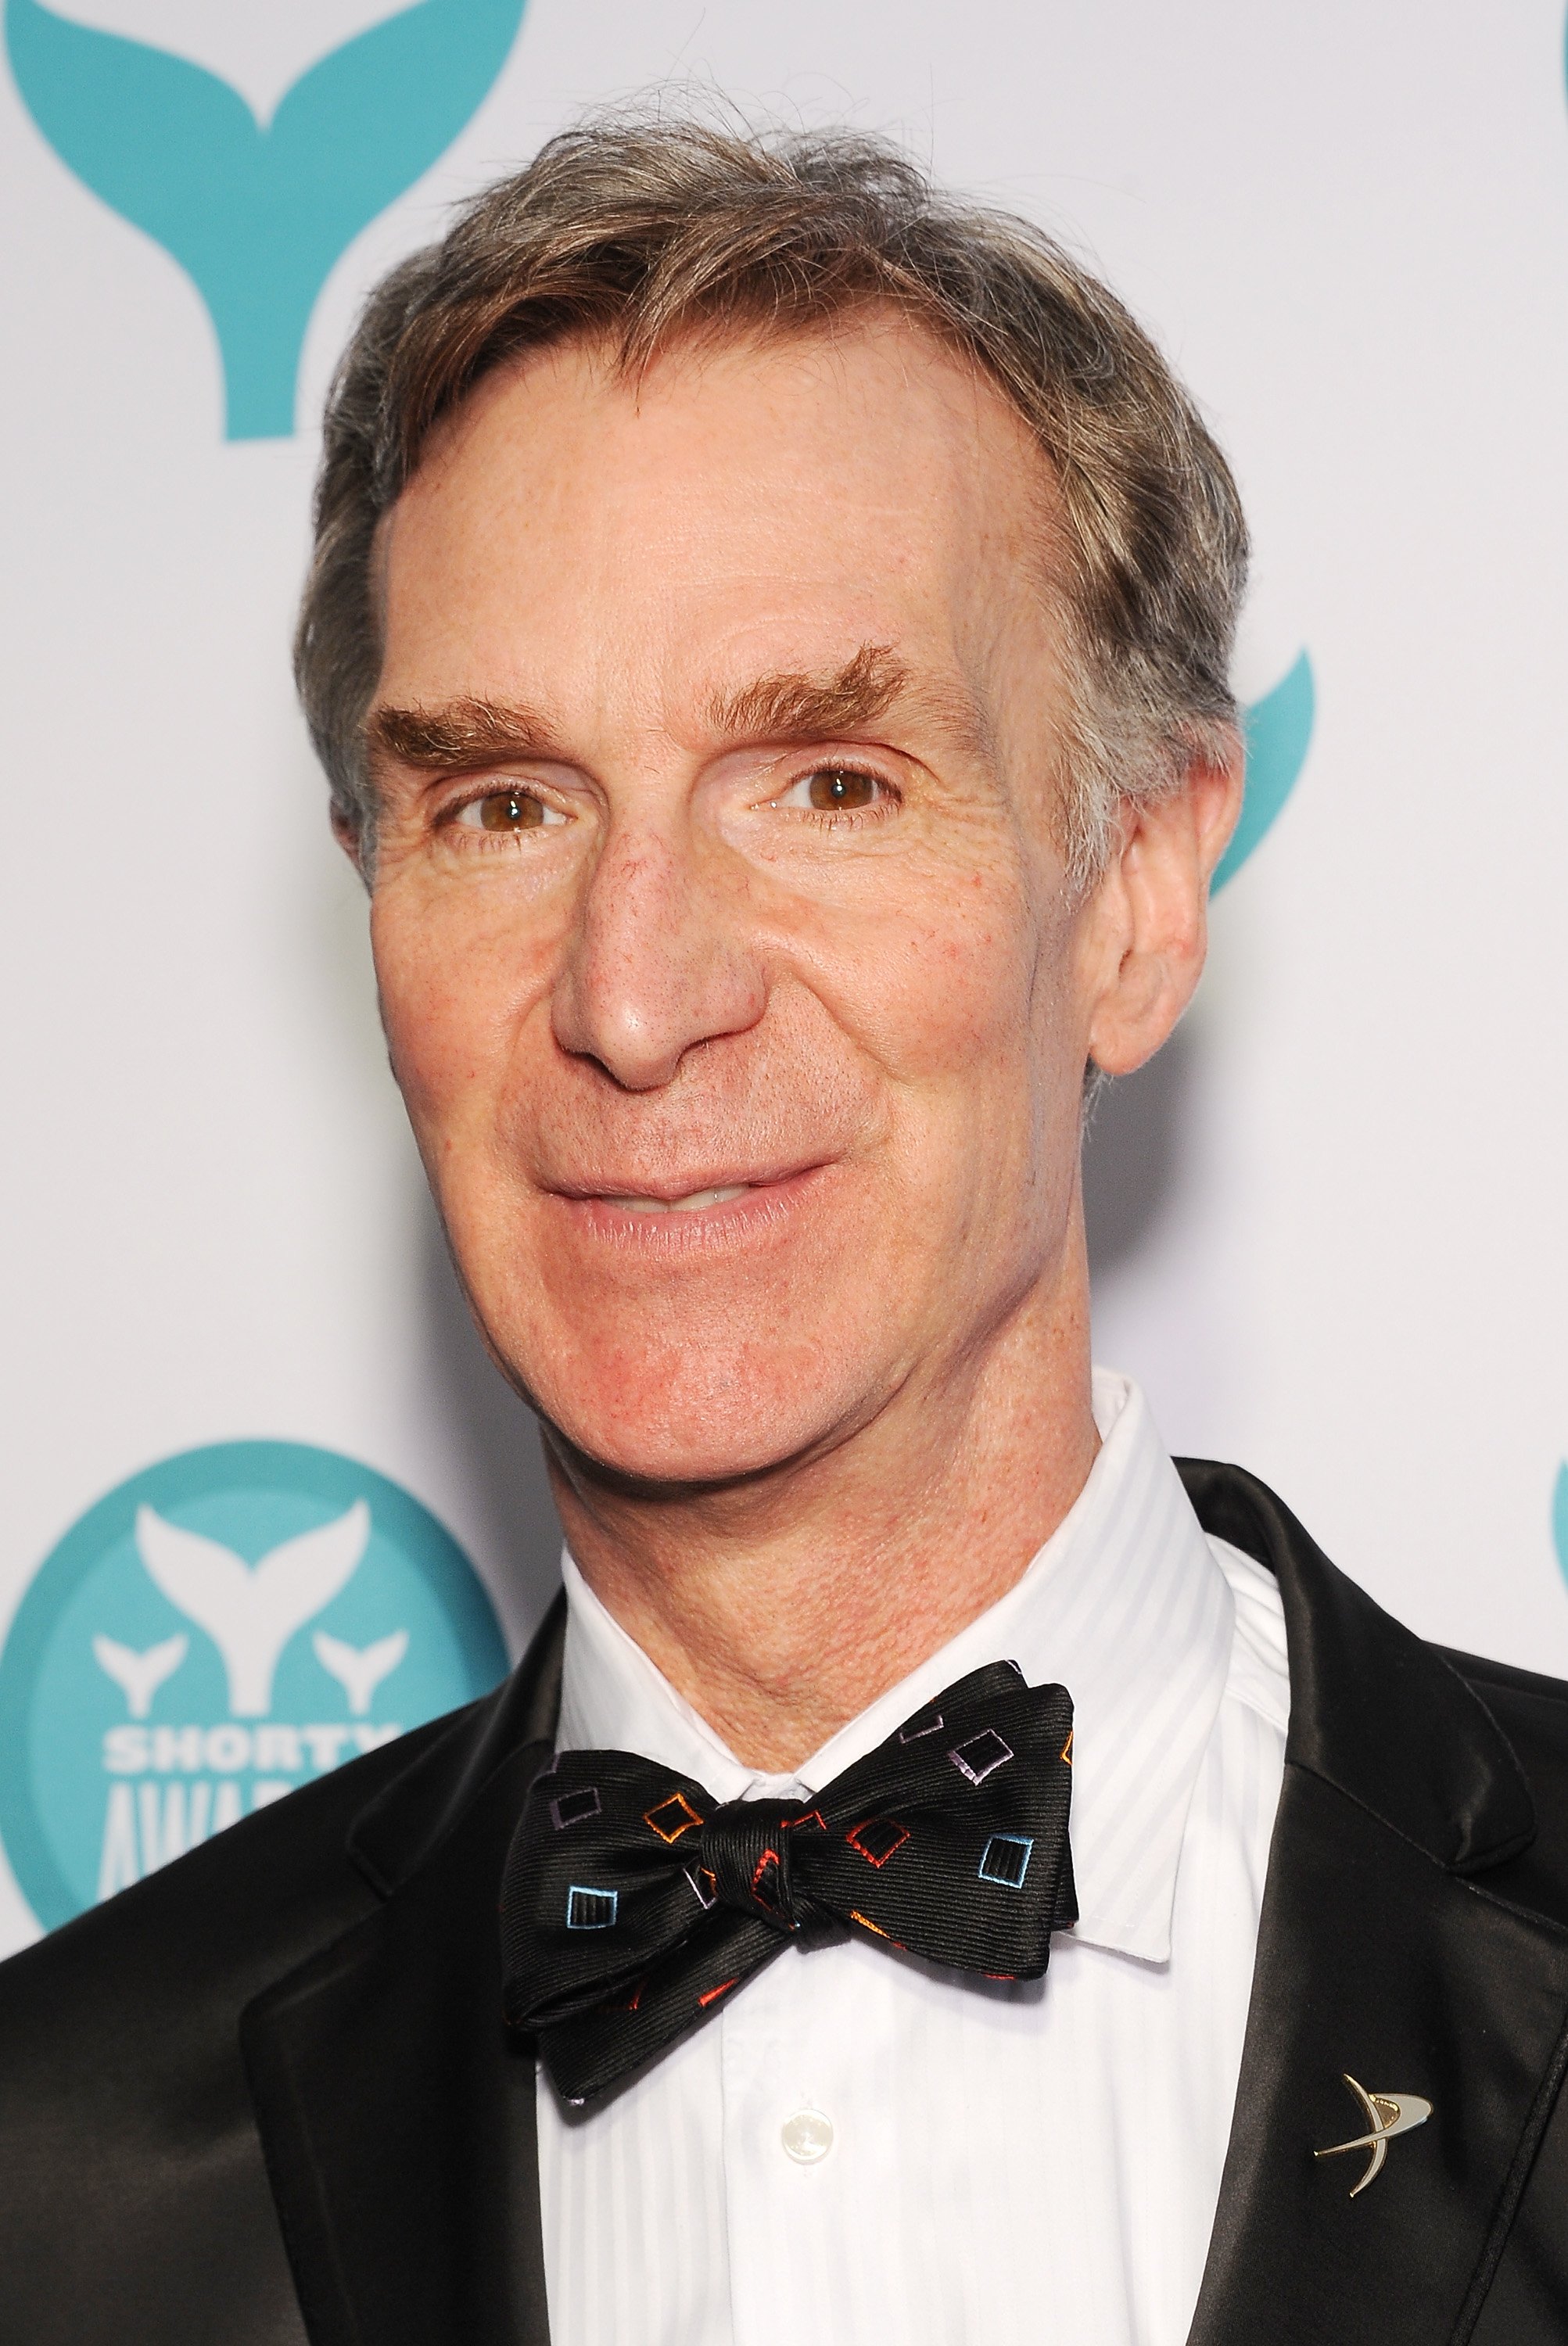 Bill Nye attends The 7th Annual Shorty Awards on April 20, 2015 in New York City.